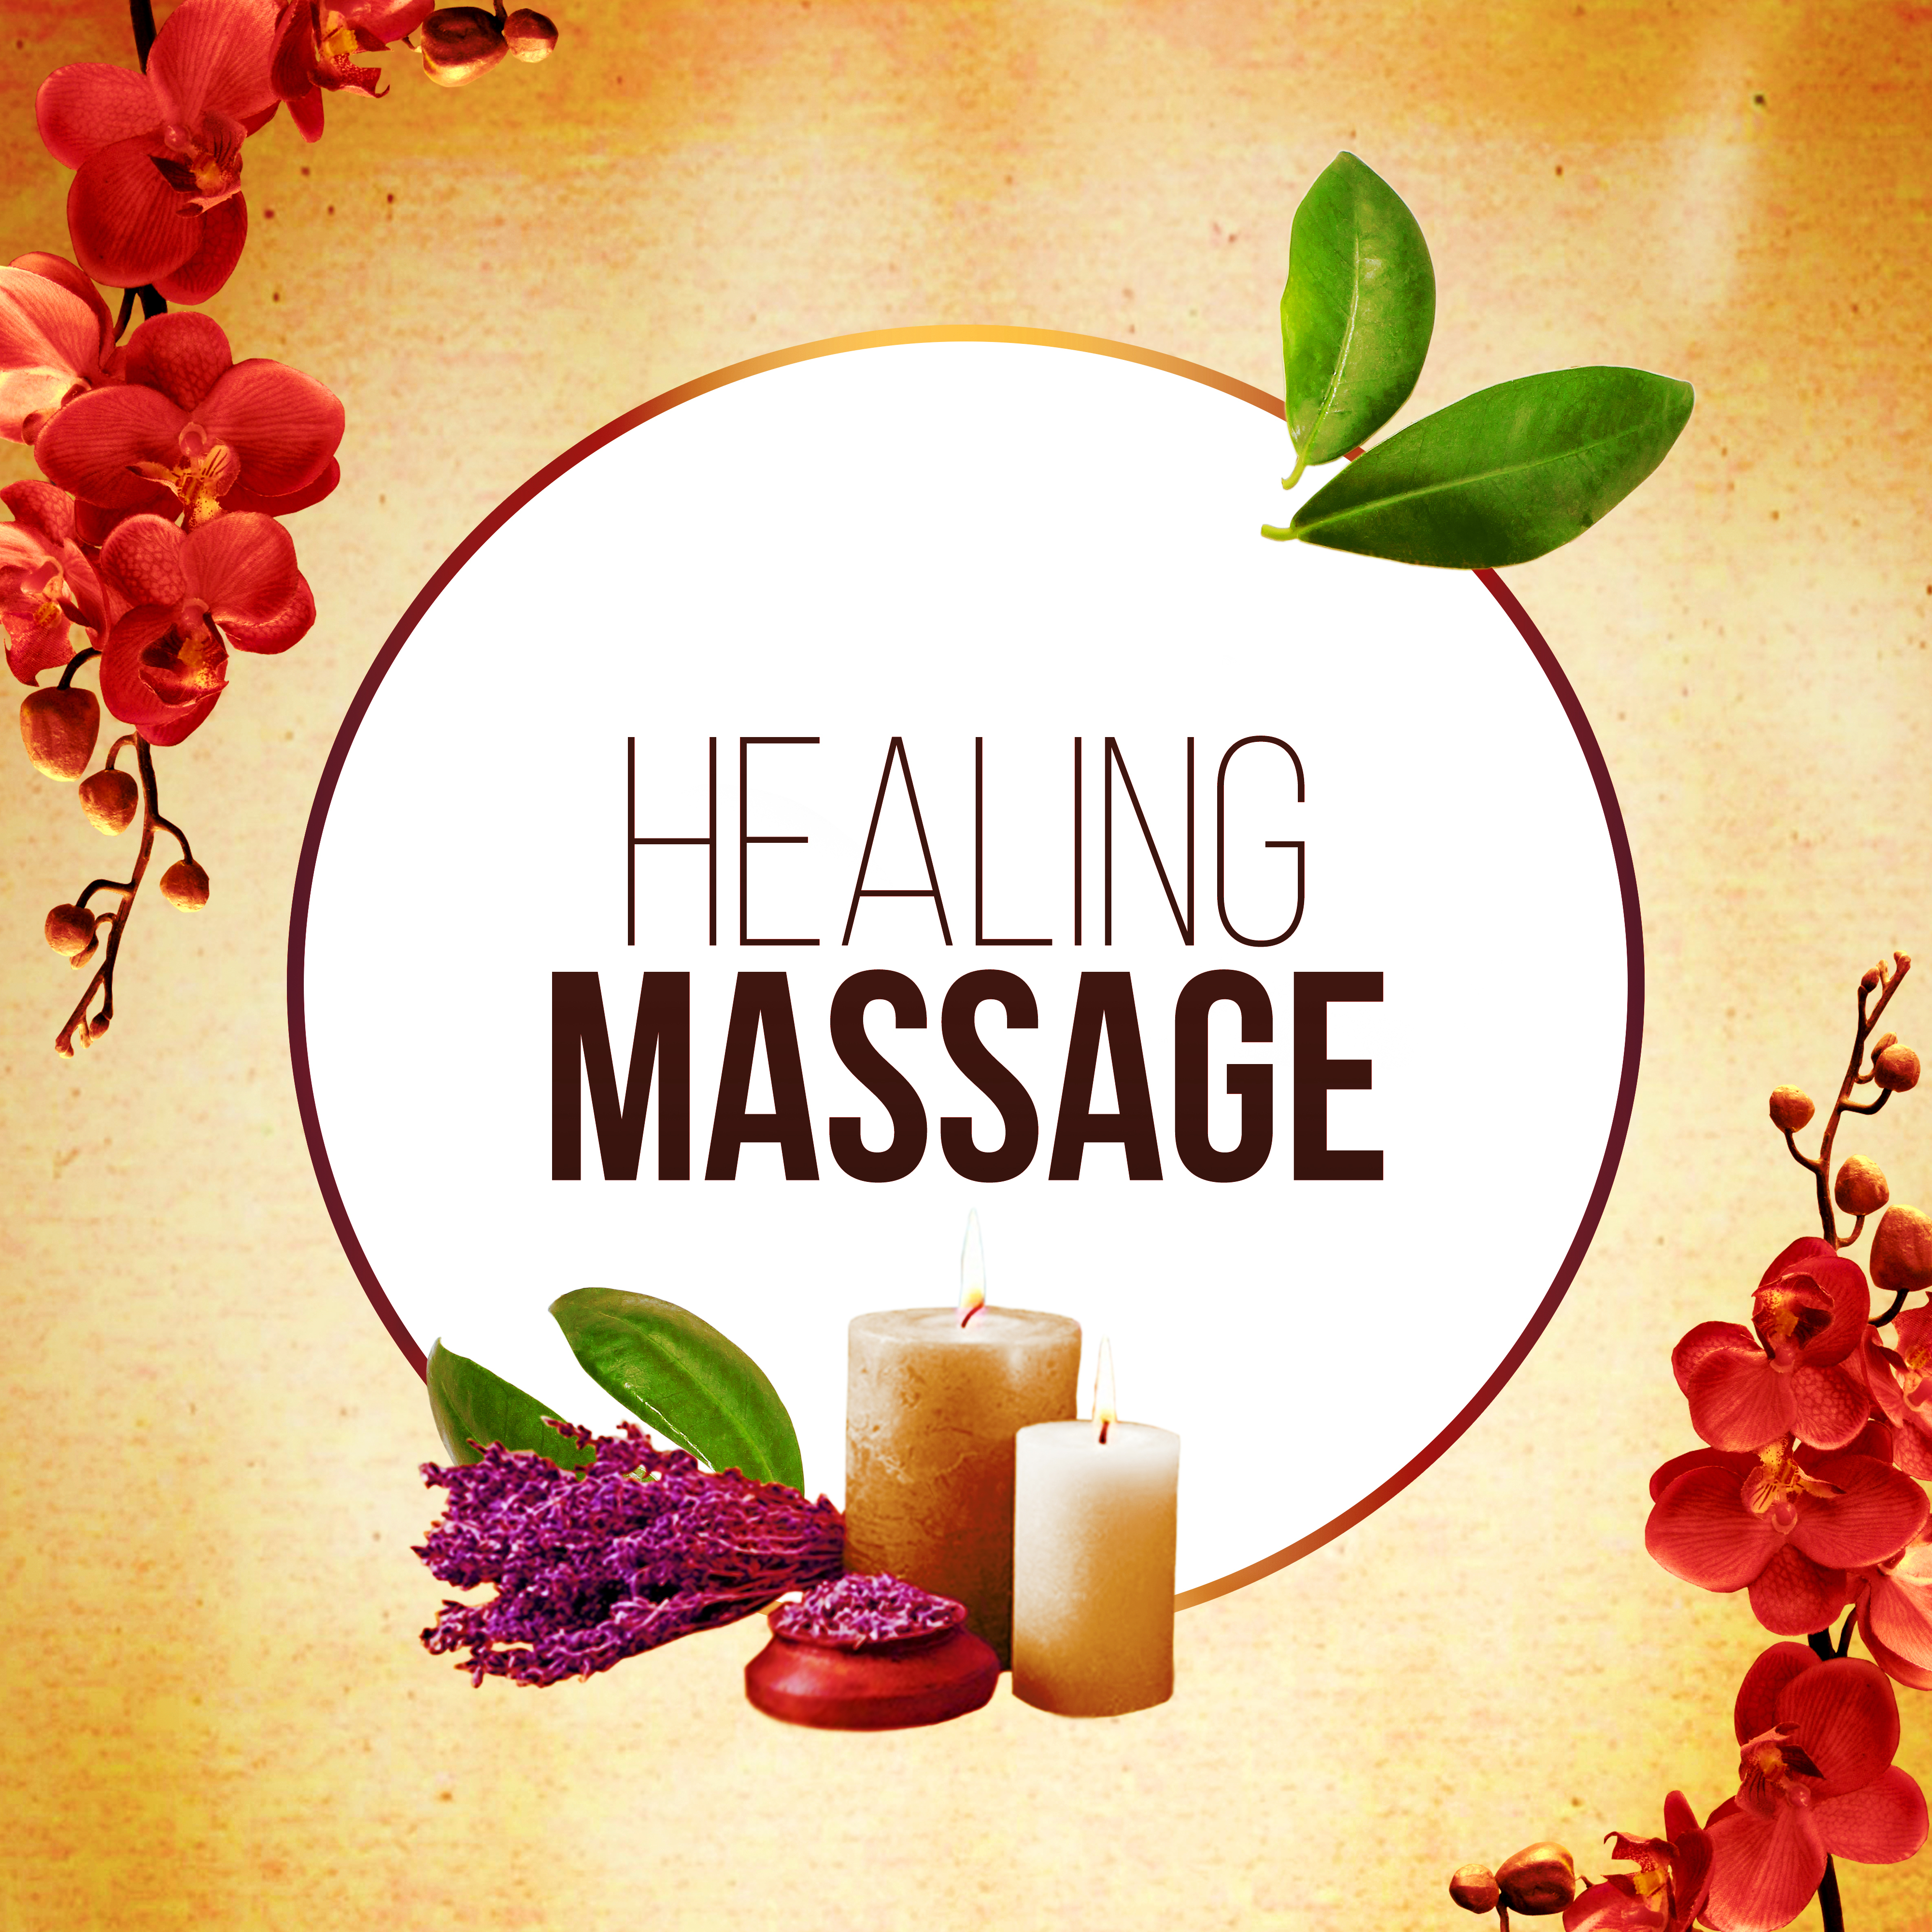 Healing Massage - Endlessly Soothing Music, Mindfulness Meditation Spiritual Healing, Peaceful Music with the Sounds of Nature